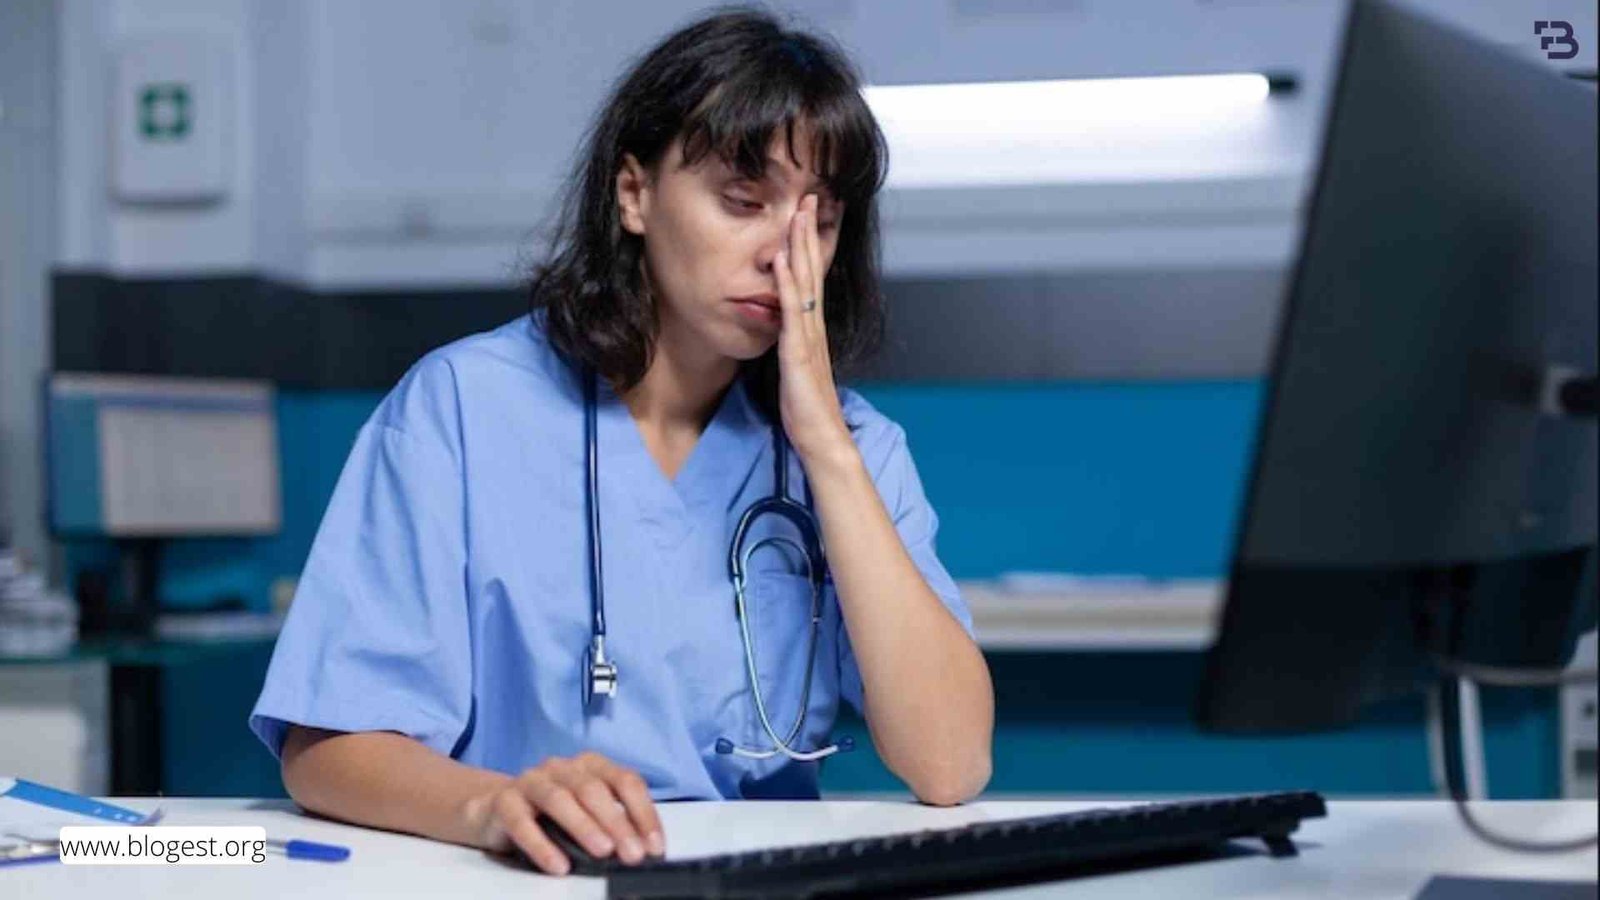 How To Deal With Nurse Burnout